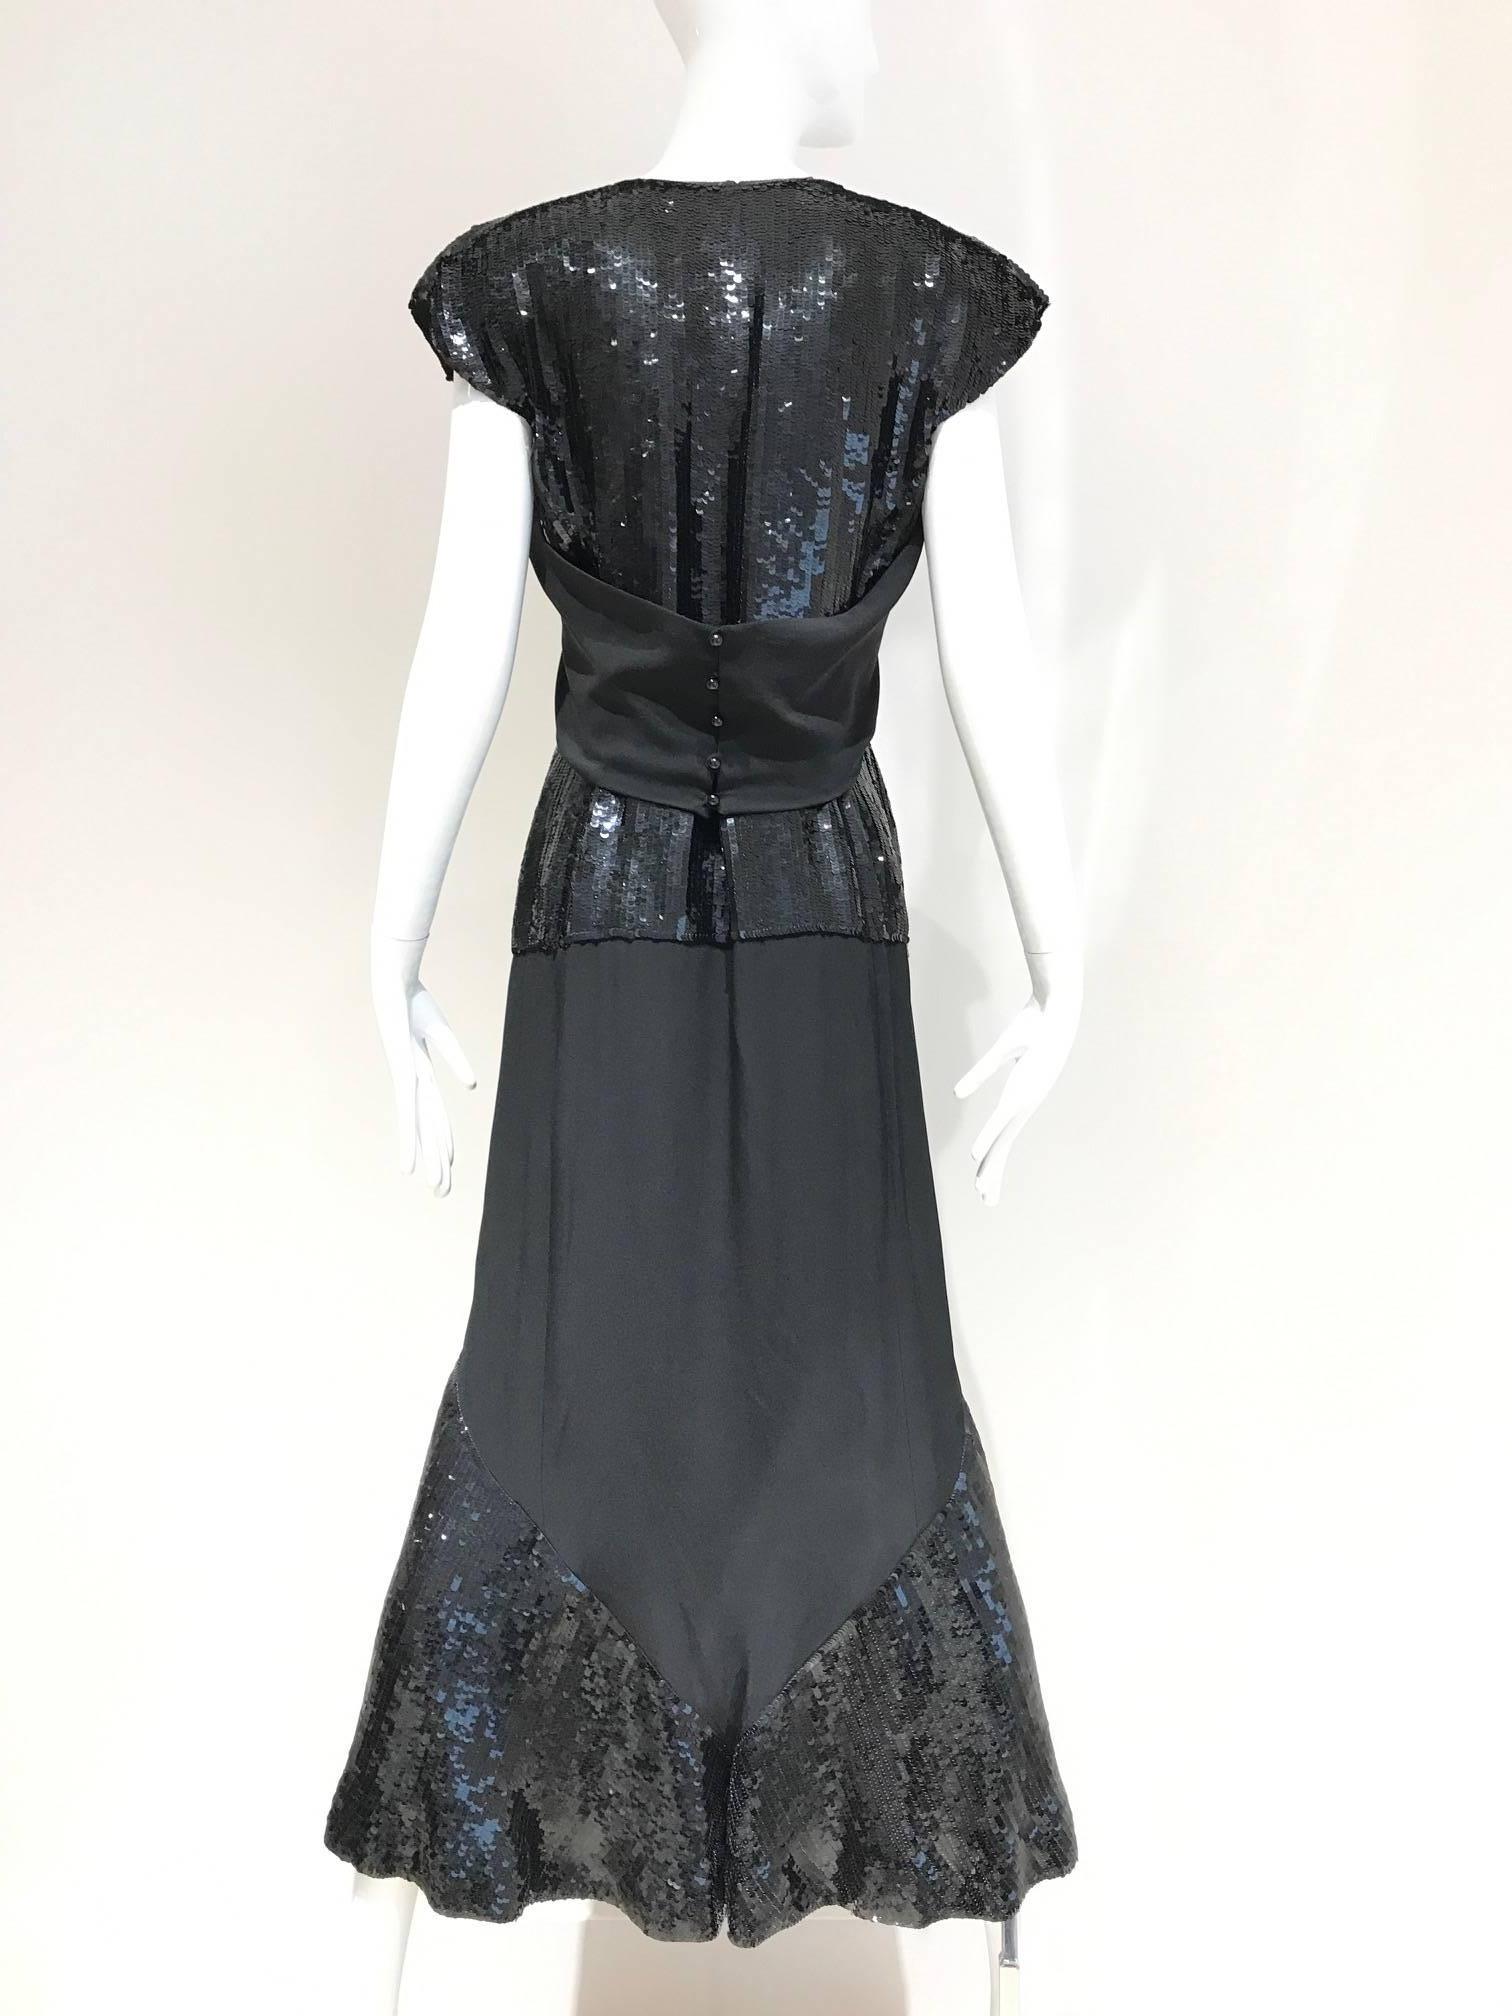 Vintage 1980s Chloe by Karl Lagerled black silk and sequin dress inspired by 1940s style. Cap sleeve with sequins.  Size 6.  Medium Made in france.  

36 inch Bust
30 Inch Waist
34 inch Hip / Dress Length: 51
